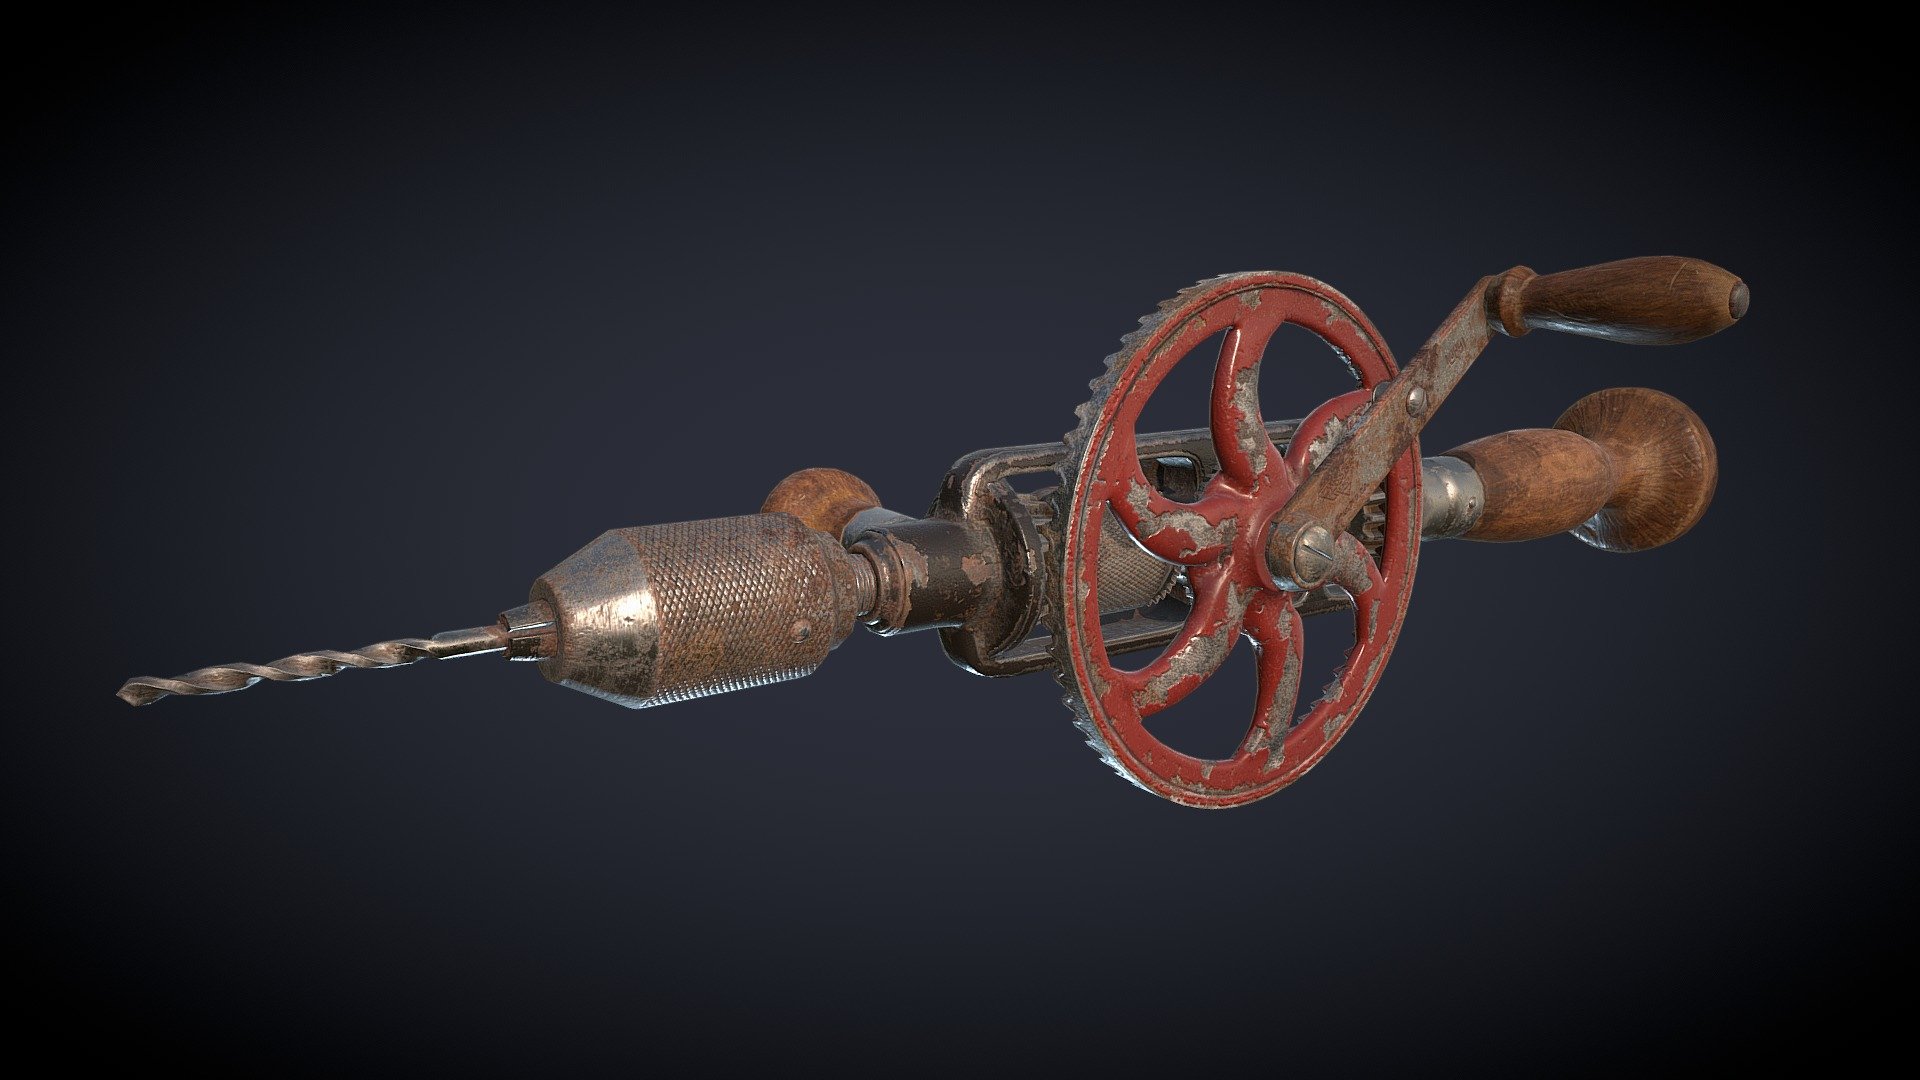 For our first GAP assignment we had to texture an old hand drill, the model was made by Kenneth Tan and textures are done by me 3d model